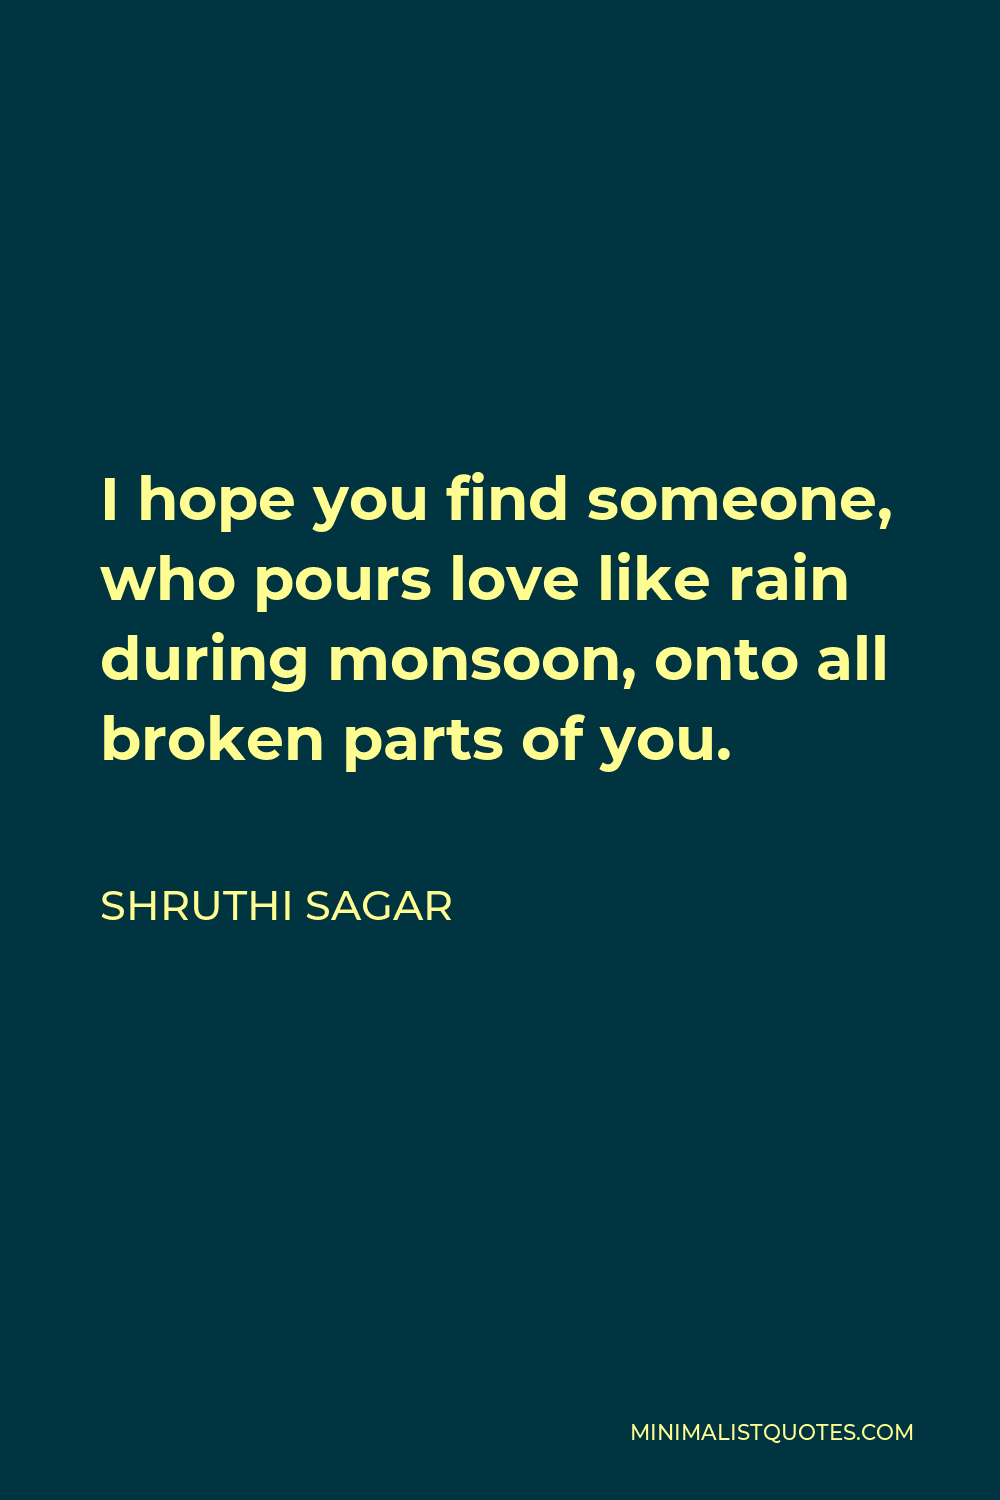 Shruthi Sagar Quote - I hope you find someone, who pours love like rain during monsoon, onto all broken parts of you.